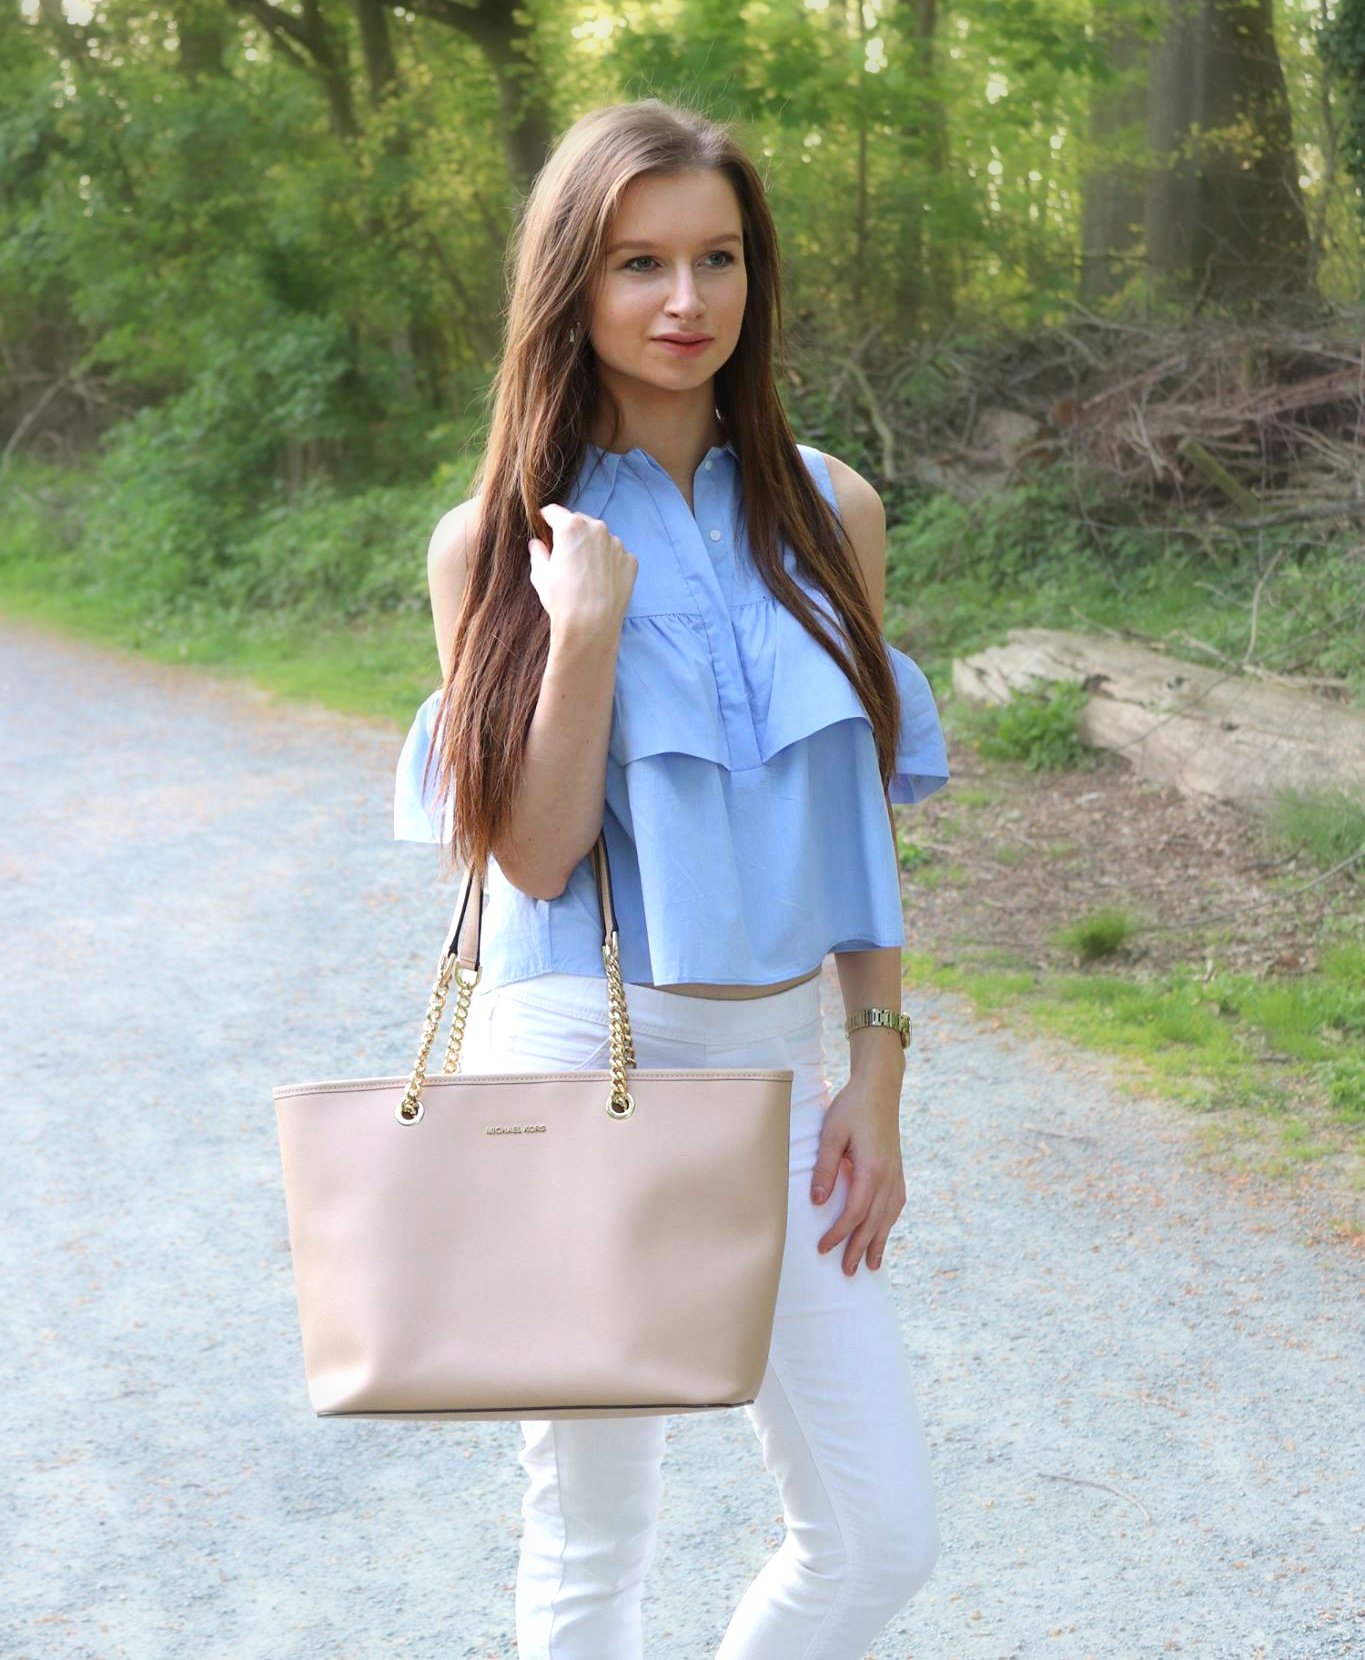 Blue ruffled blouse with white jeans and Michael Kors bag